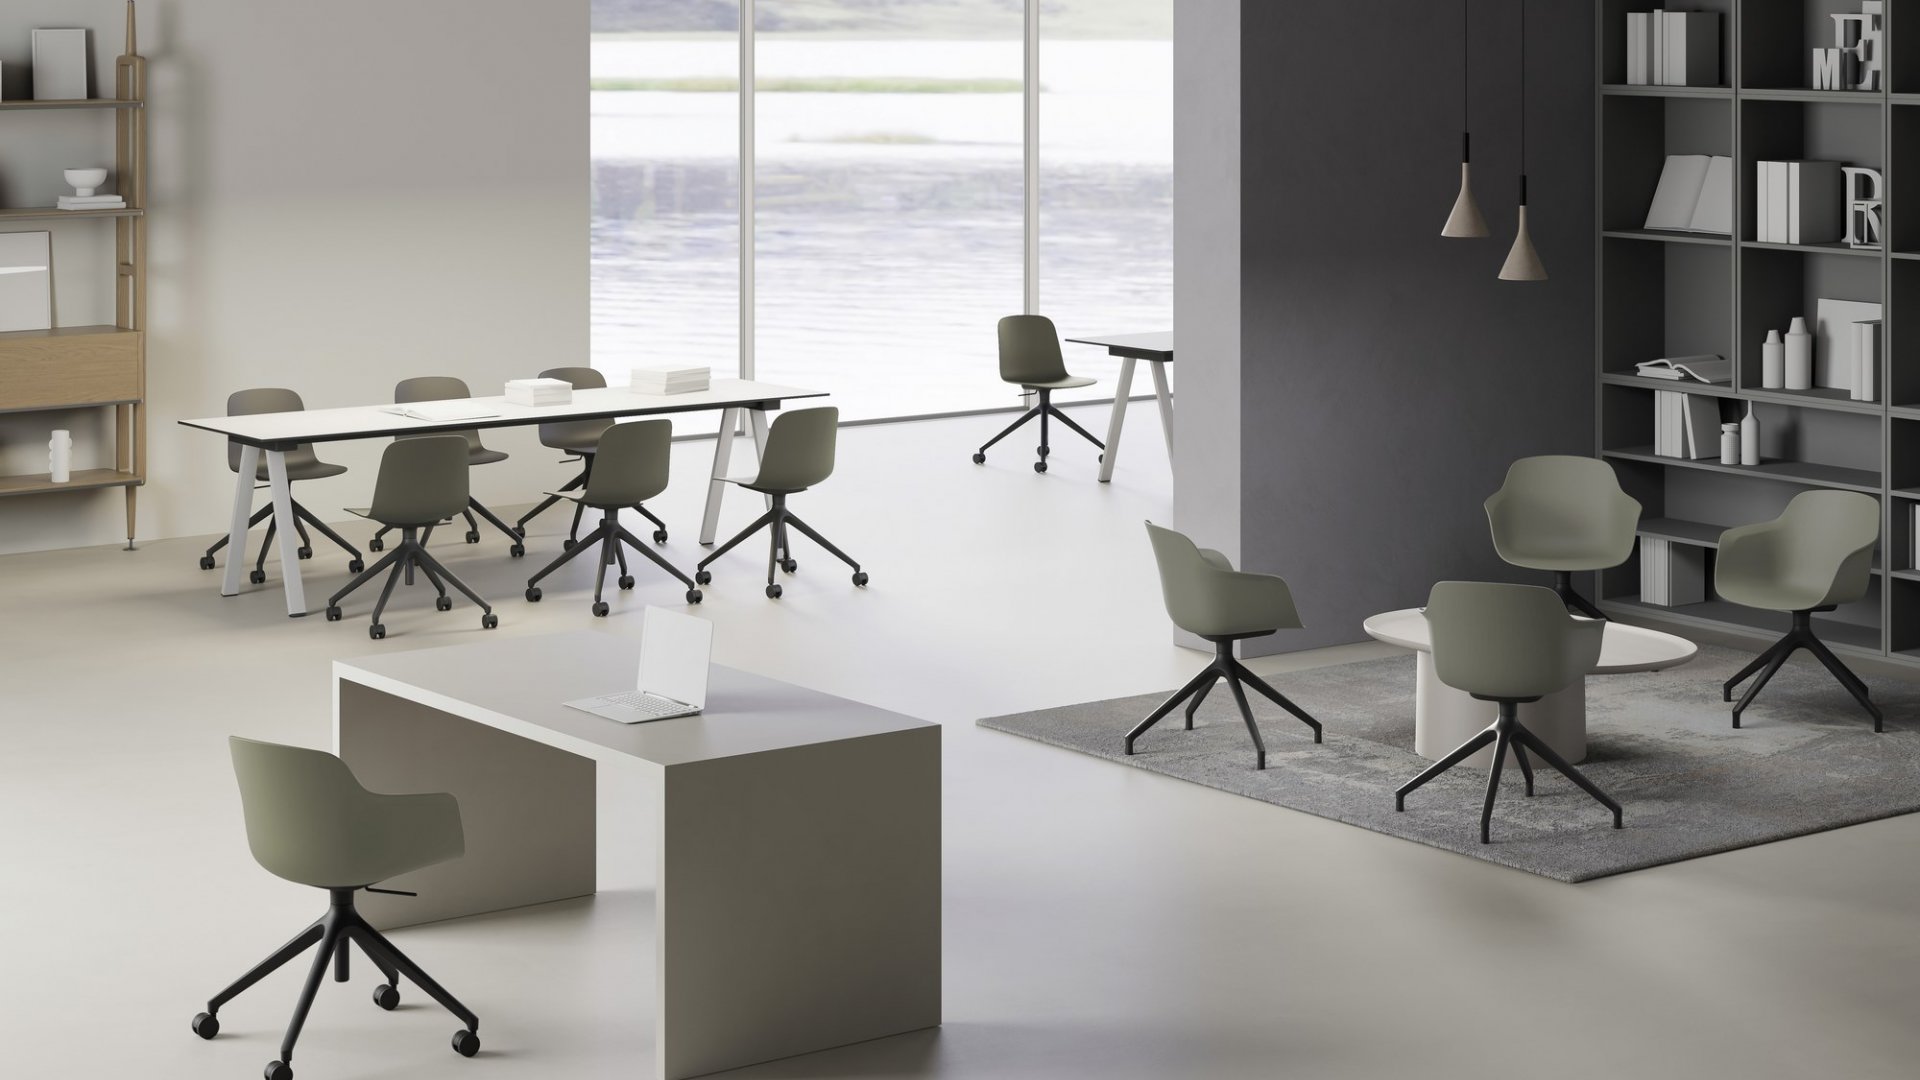 LORIA office chairs